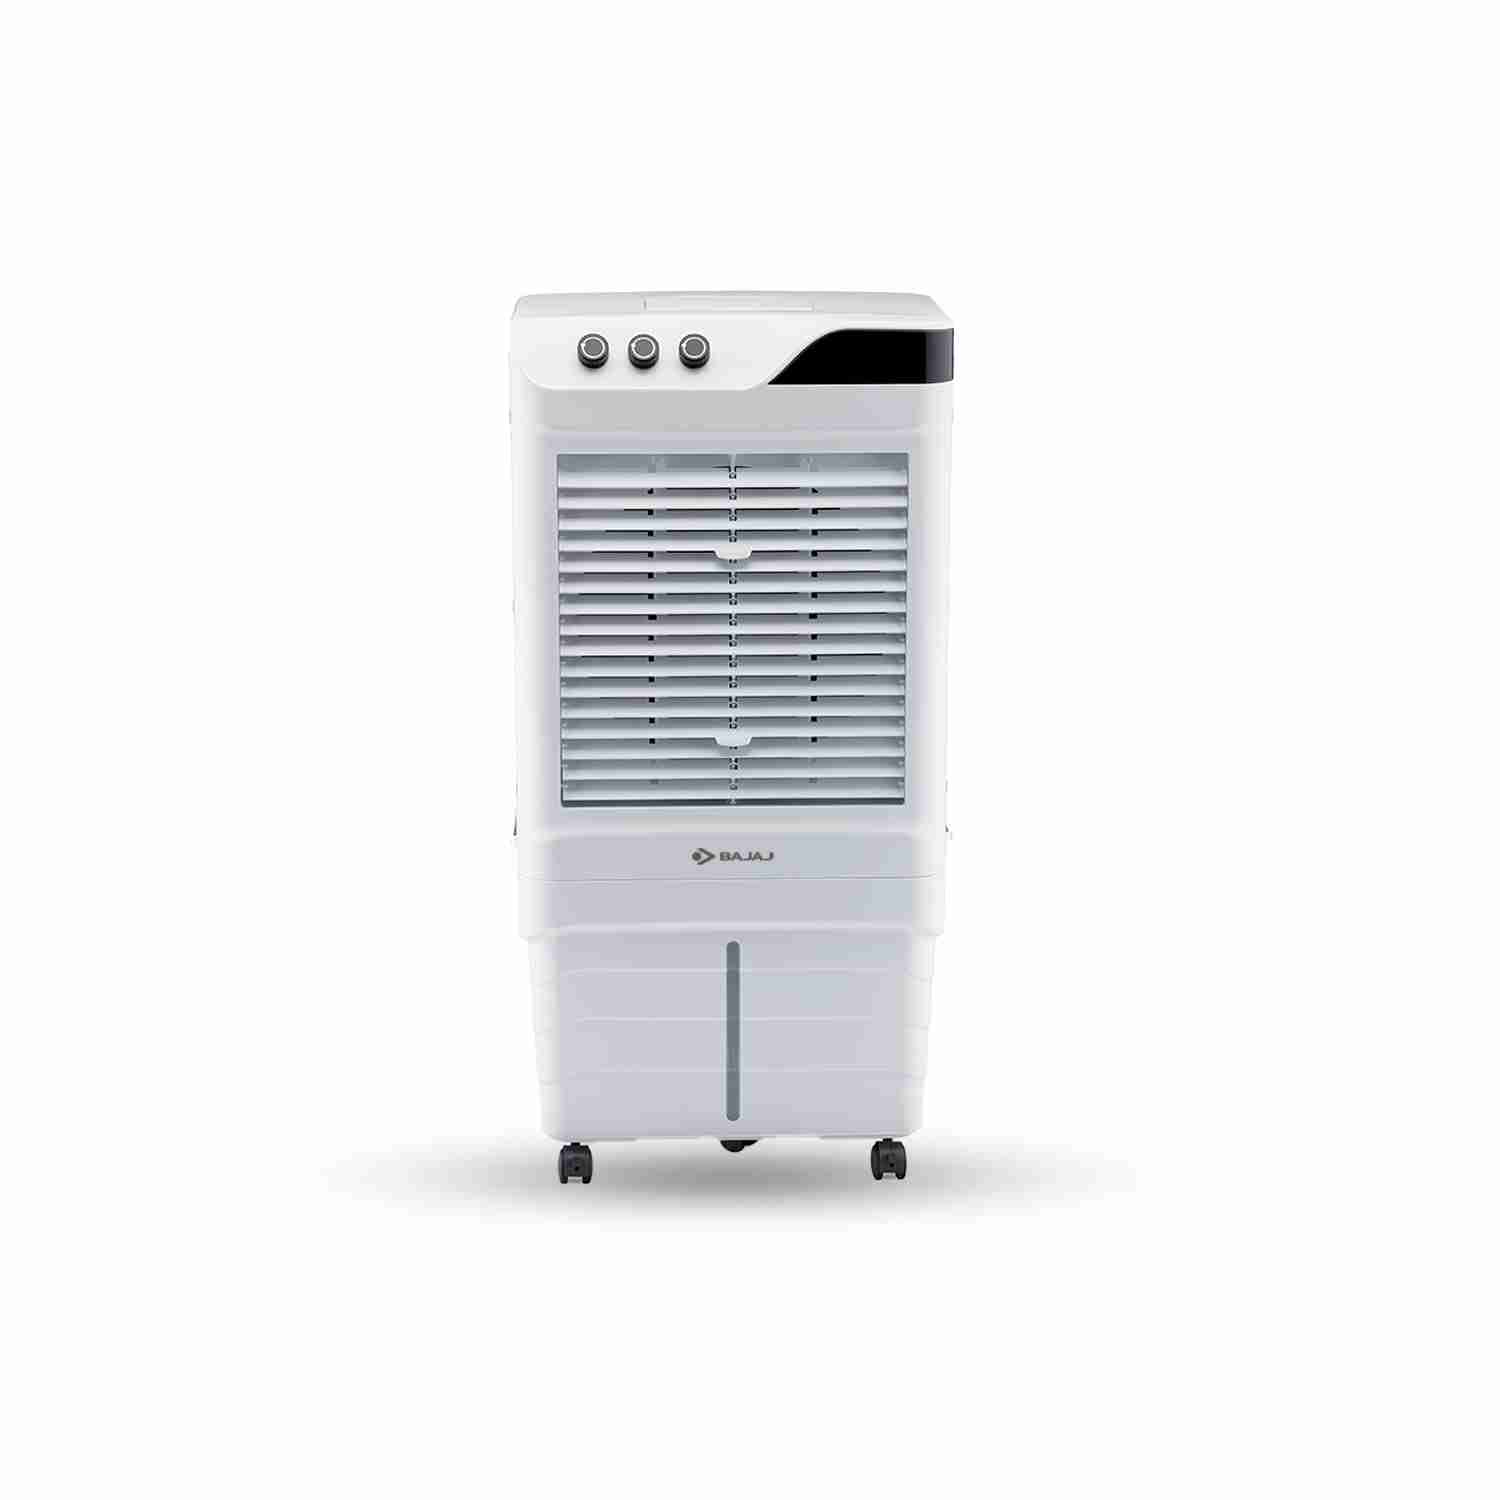 Bajaj Air Coolers - Beat the Heat with Unbeatable Offers!